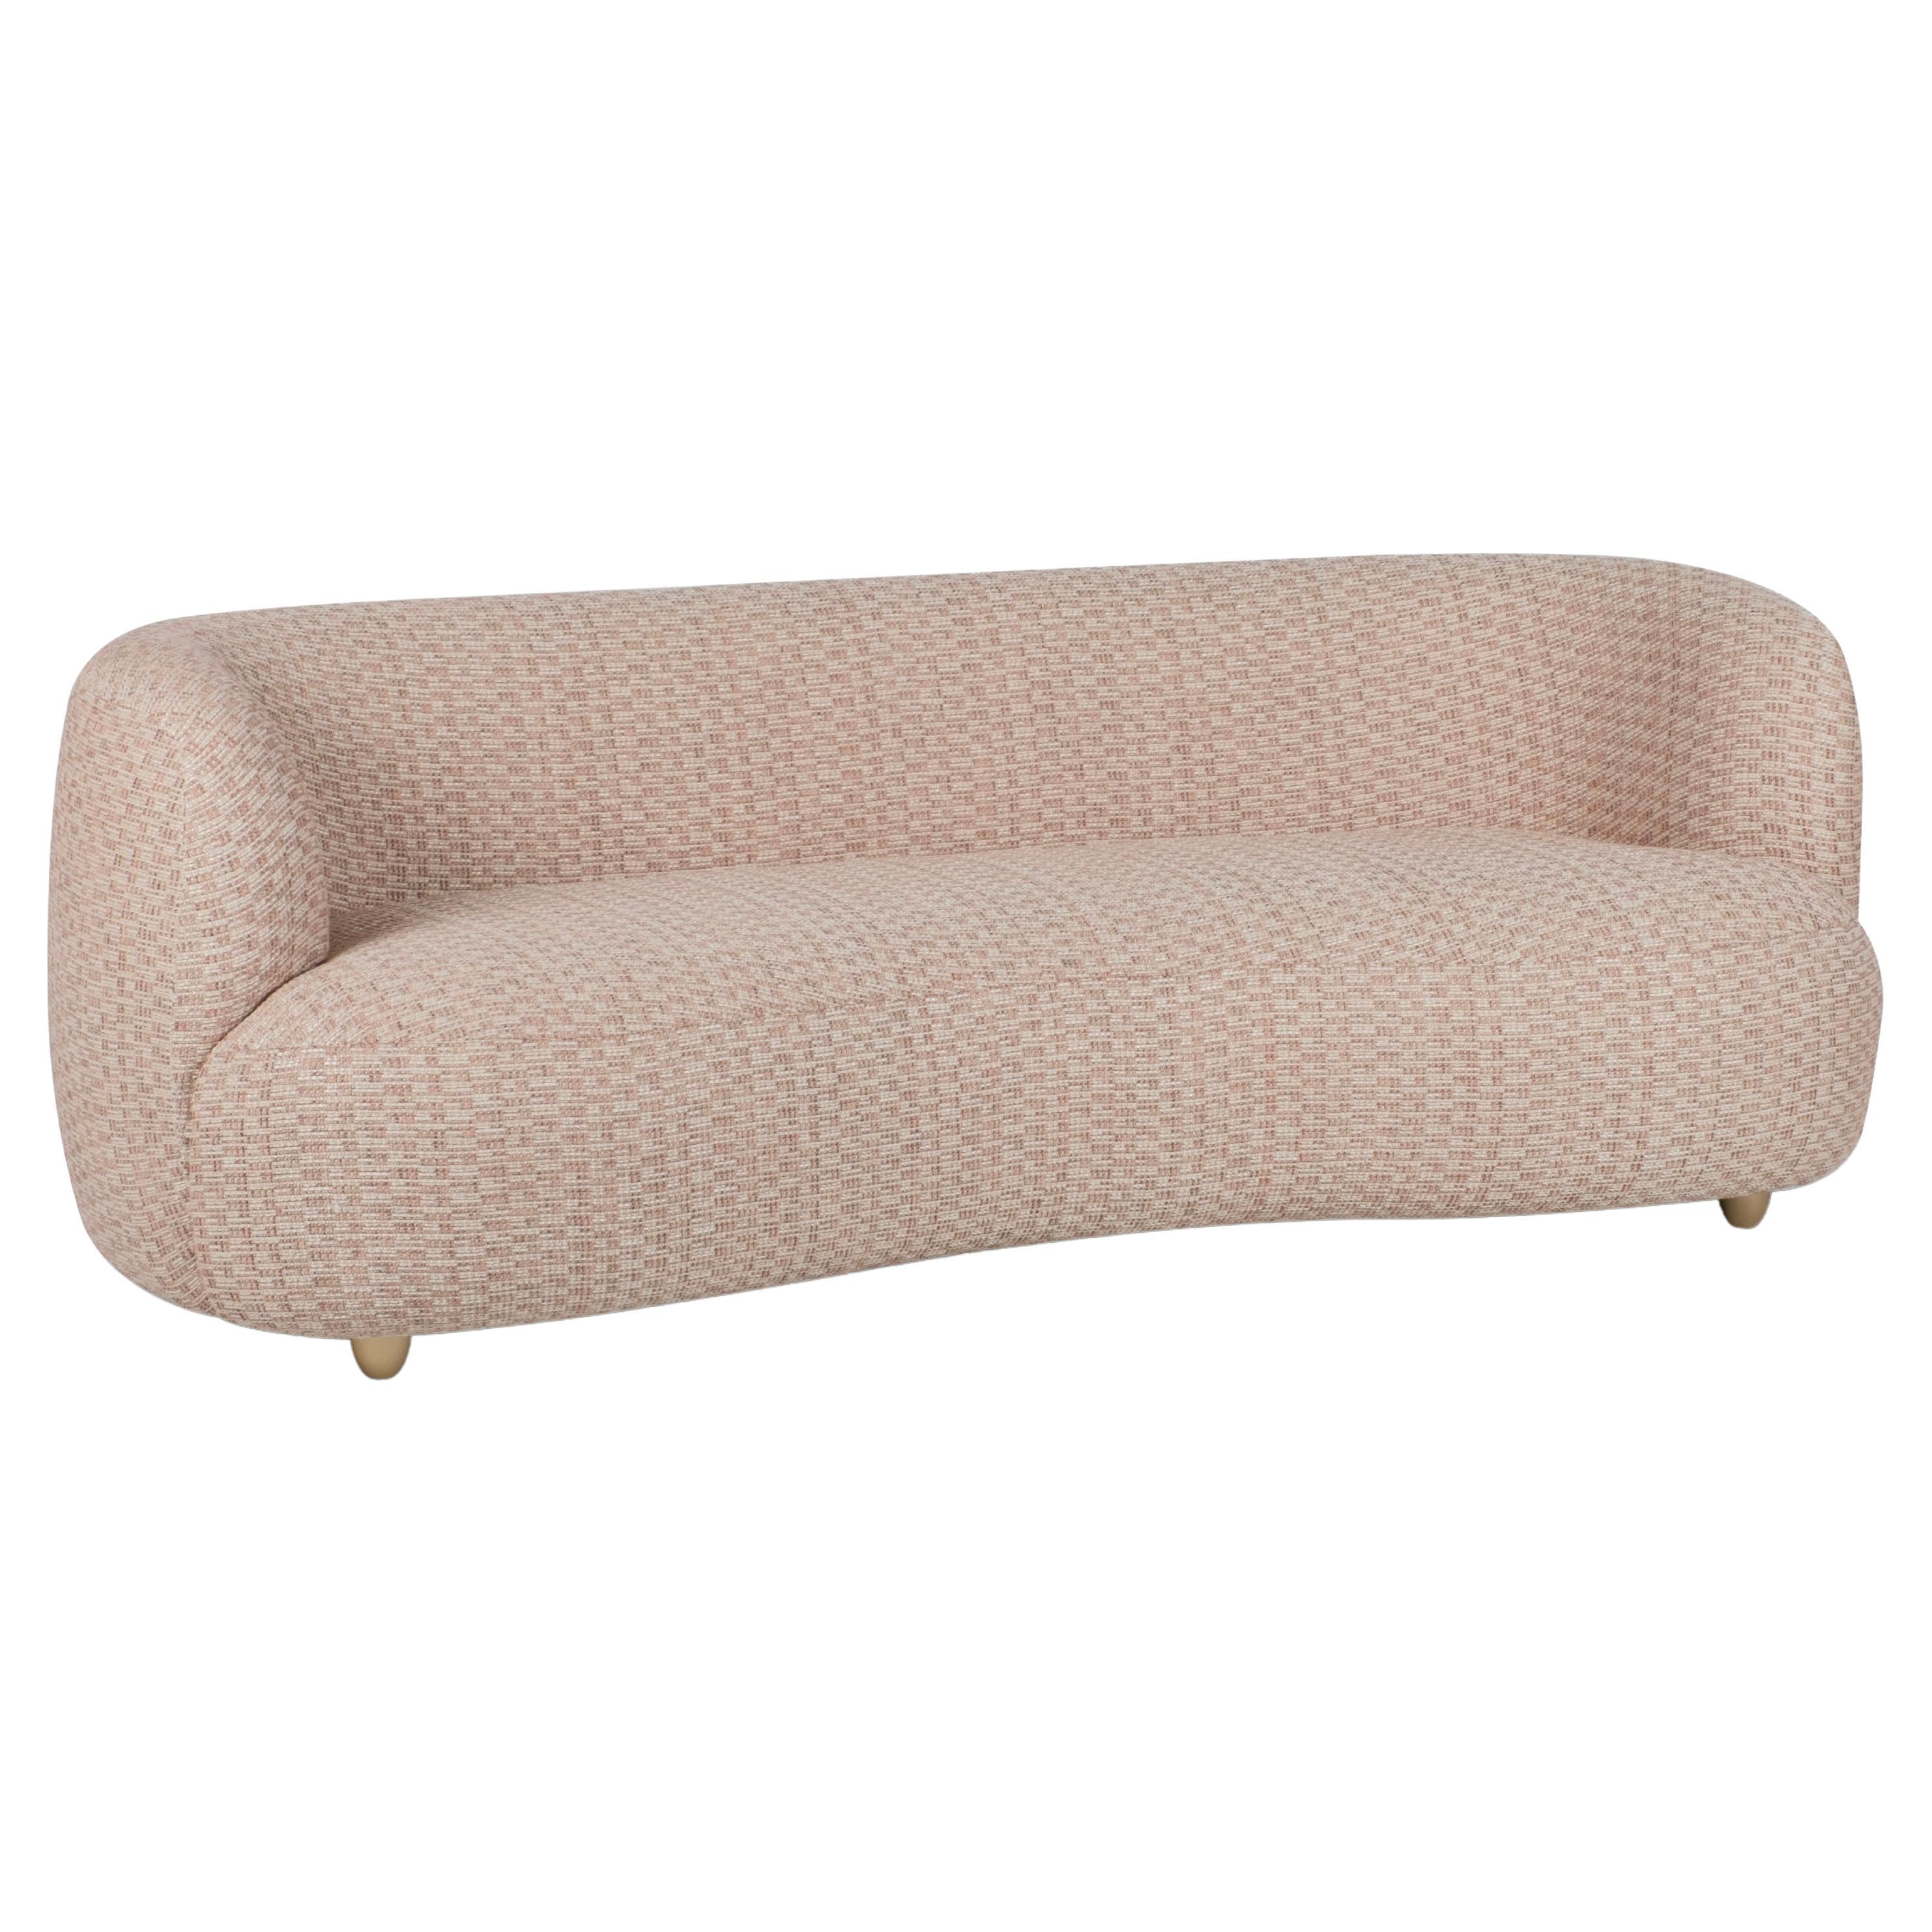 Why is a loveseat called a loveseat?